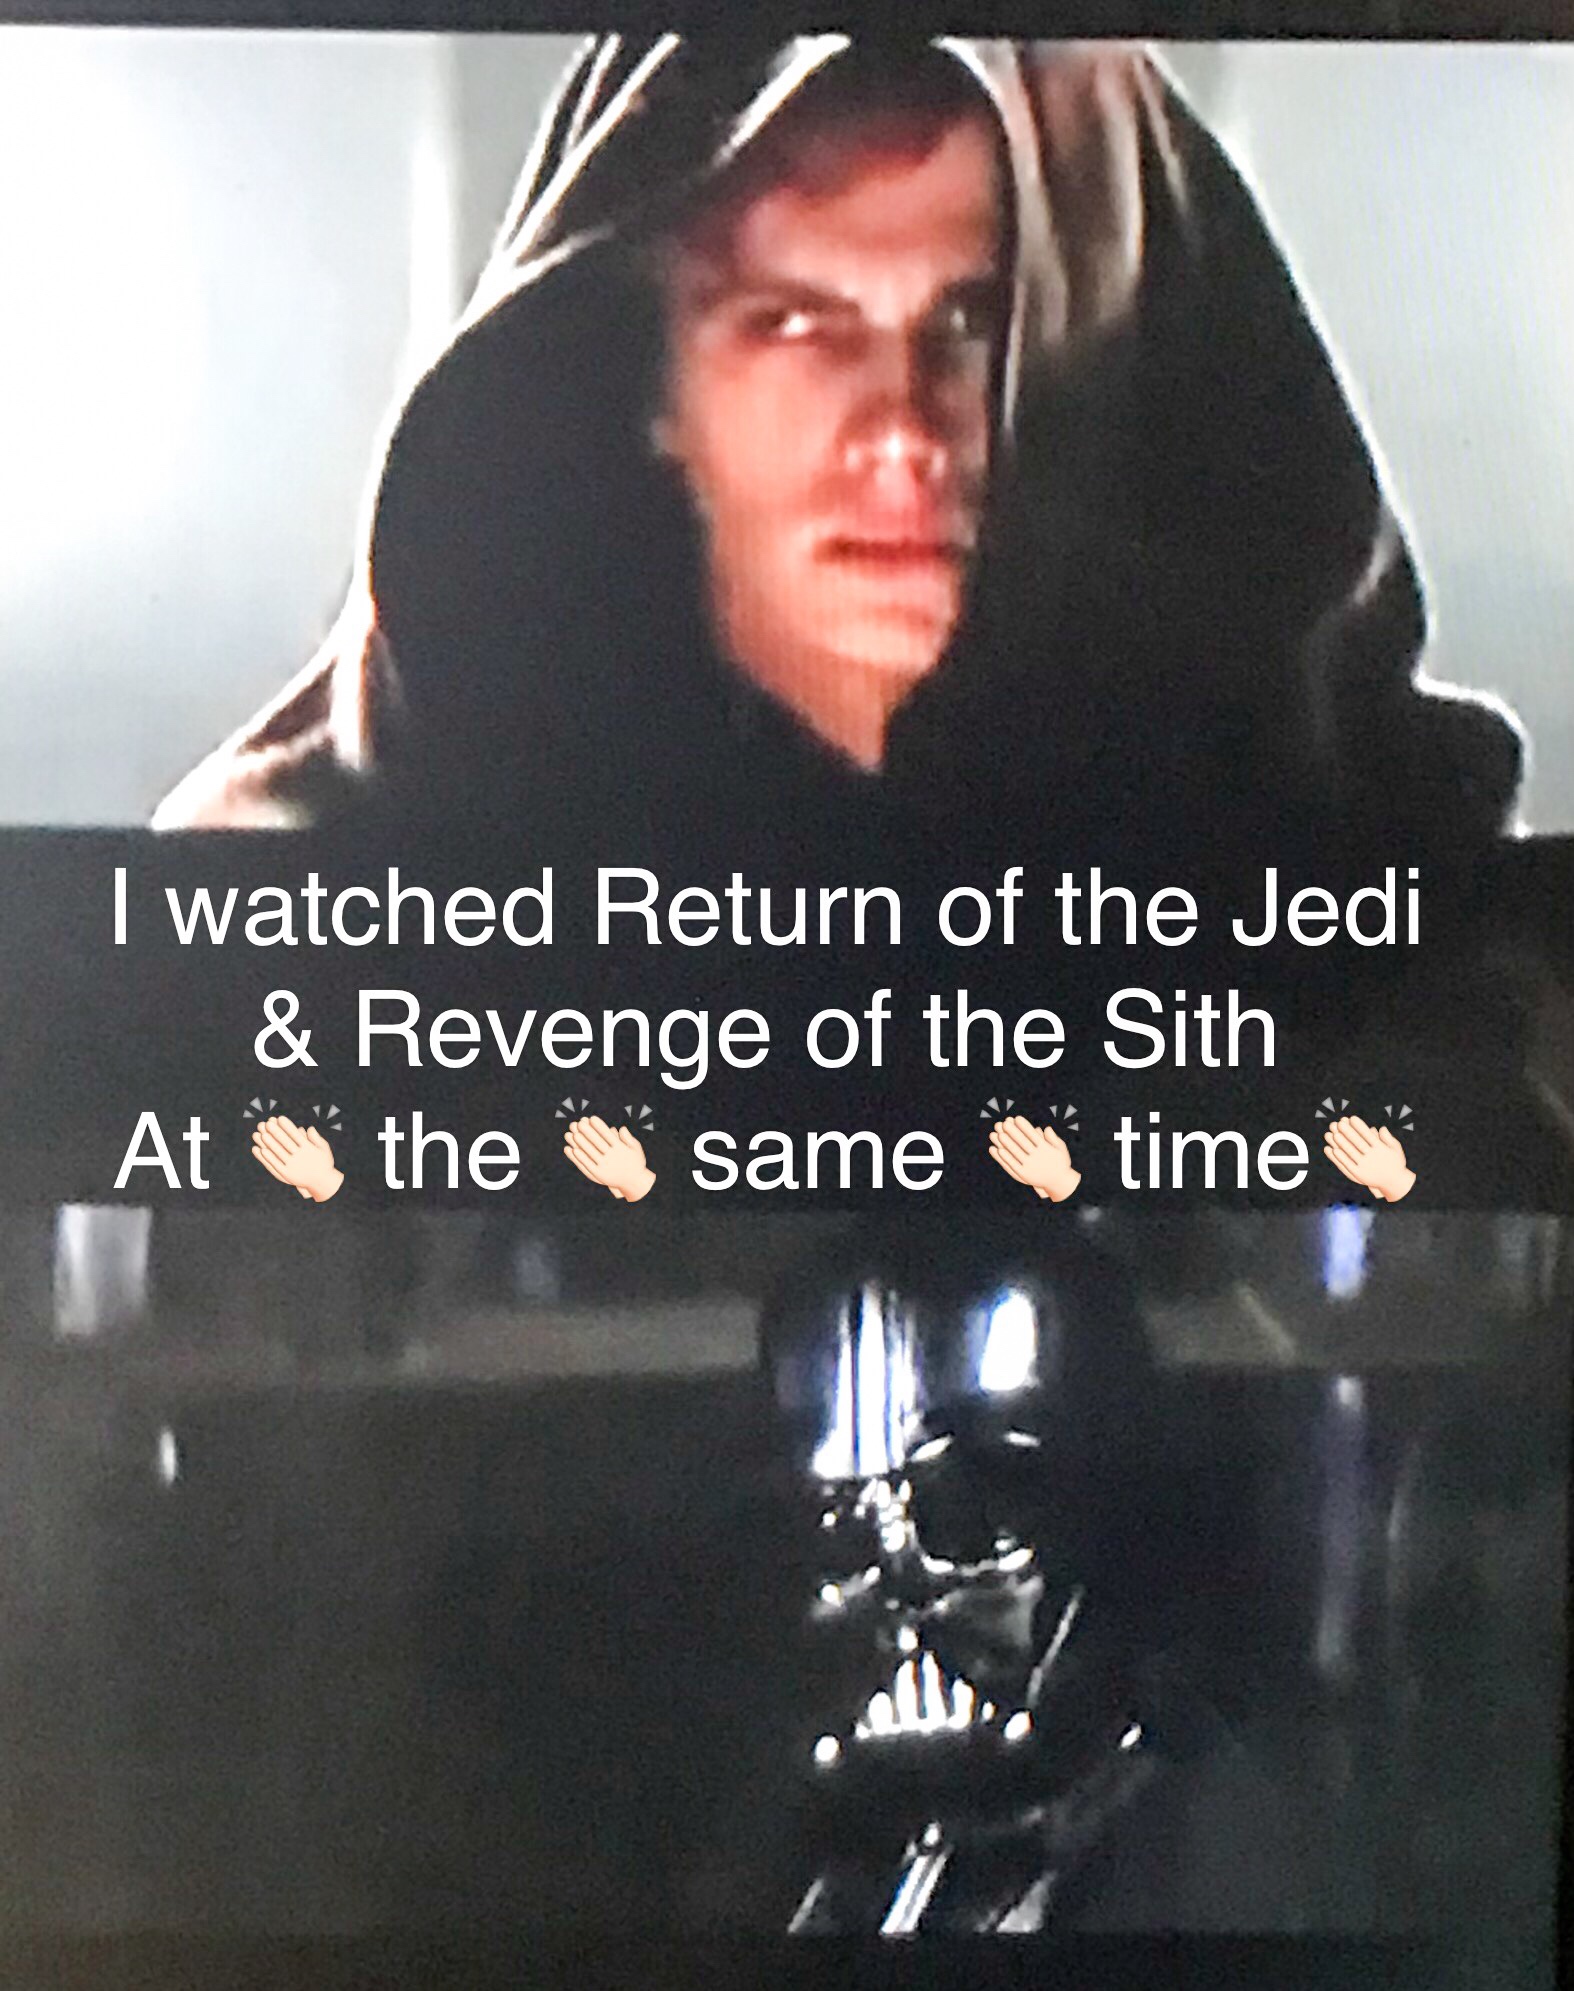 photo caption - I watched Return of the Jedi & Revenge of the Sith At the same time